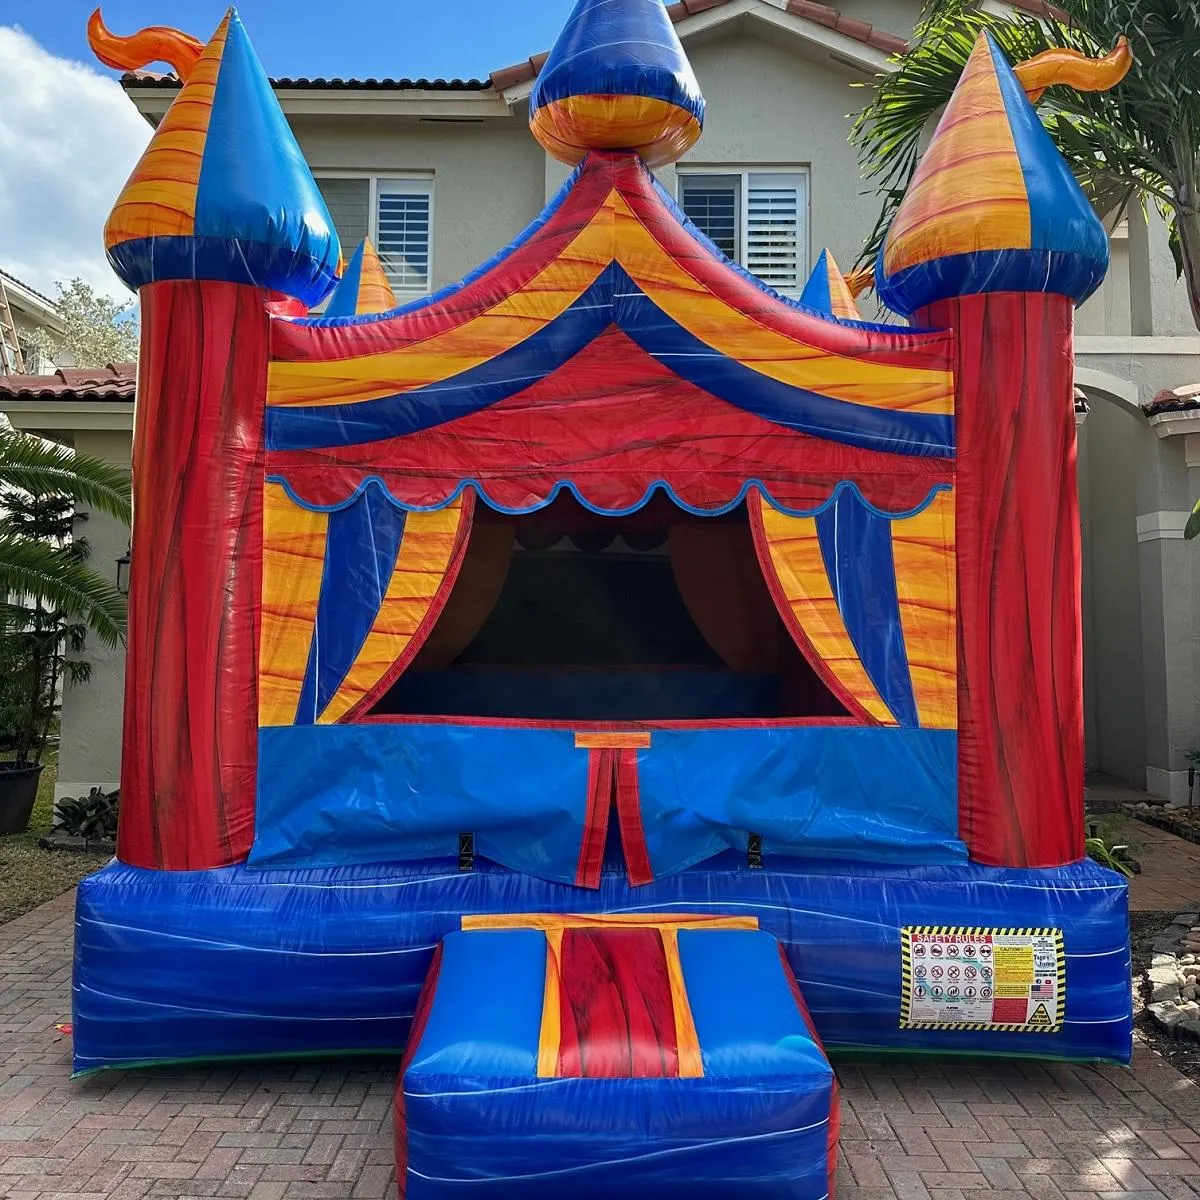 Primary Castle Bounce House 7